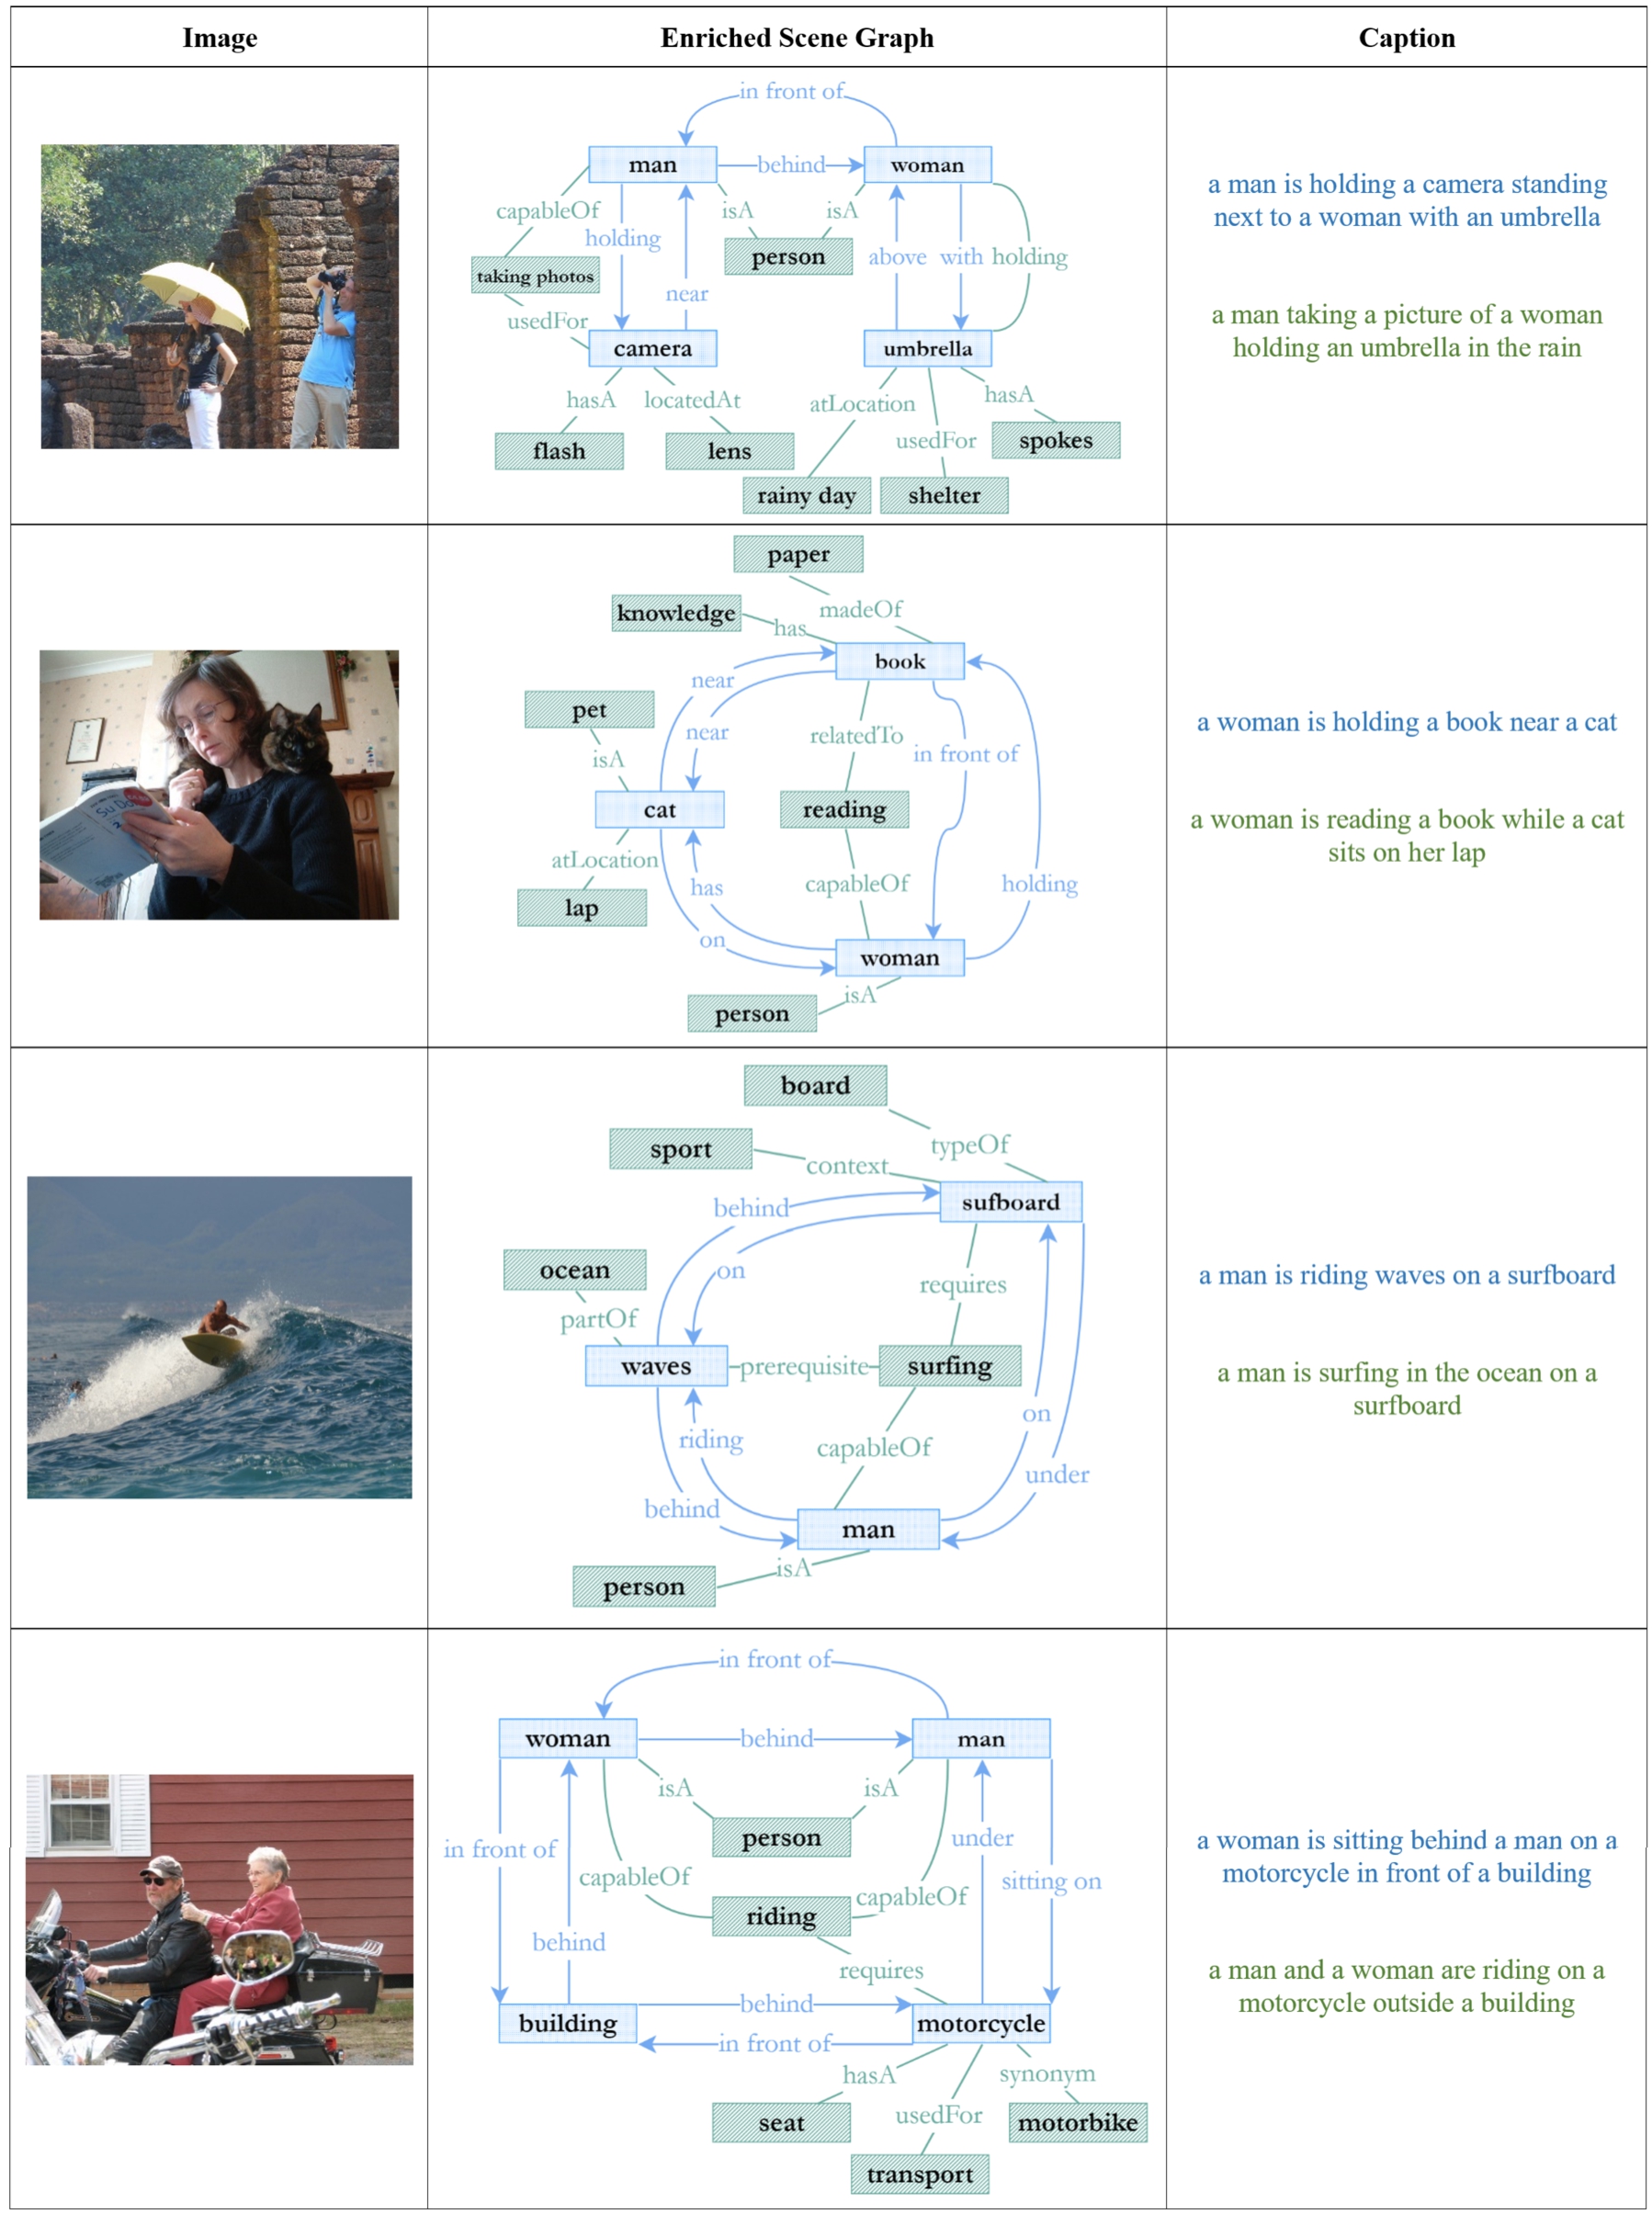 Qualitative results of caption generation using conventional scene graphs (blue) and enriched scene graphs (green). Enriched scene graphs result in more expressive and meaningful image captions. (COCO images.)